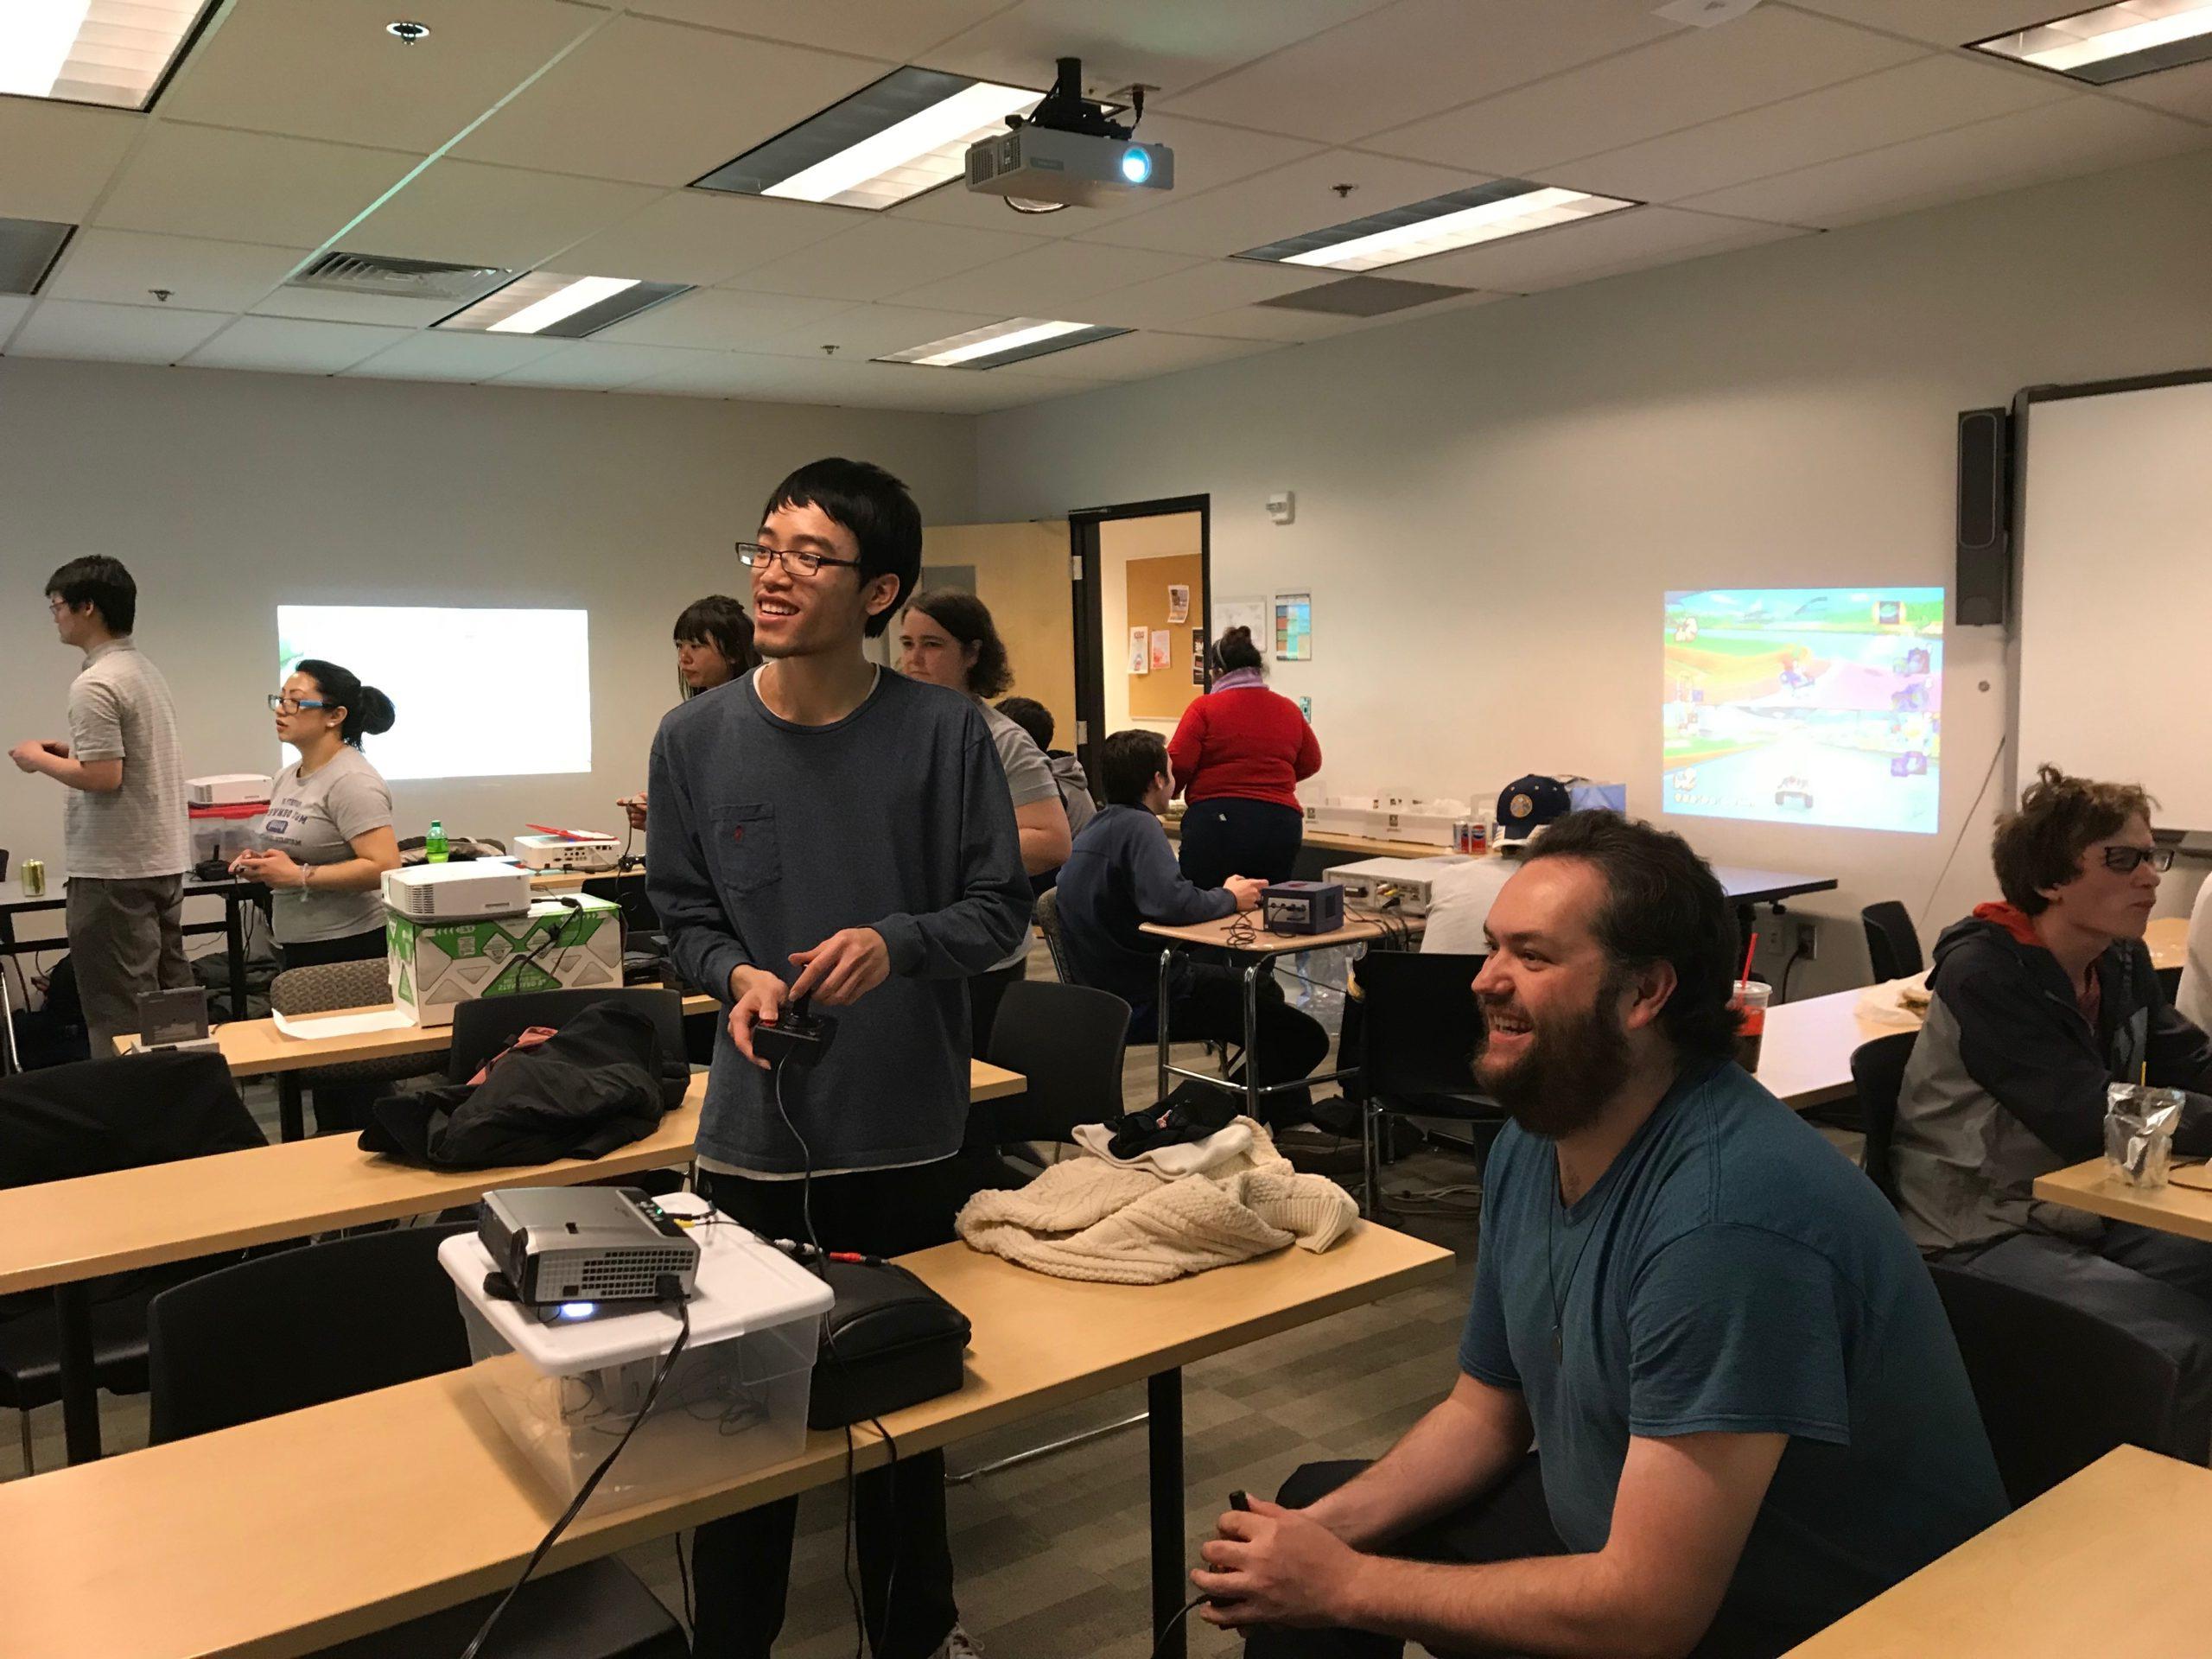 Students playing video games in a classroom during Retro Game Day